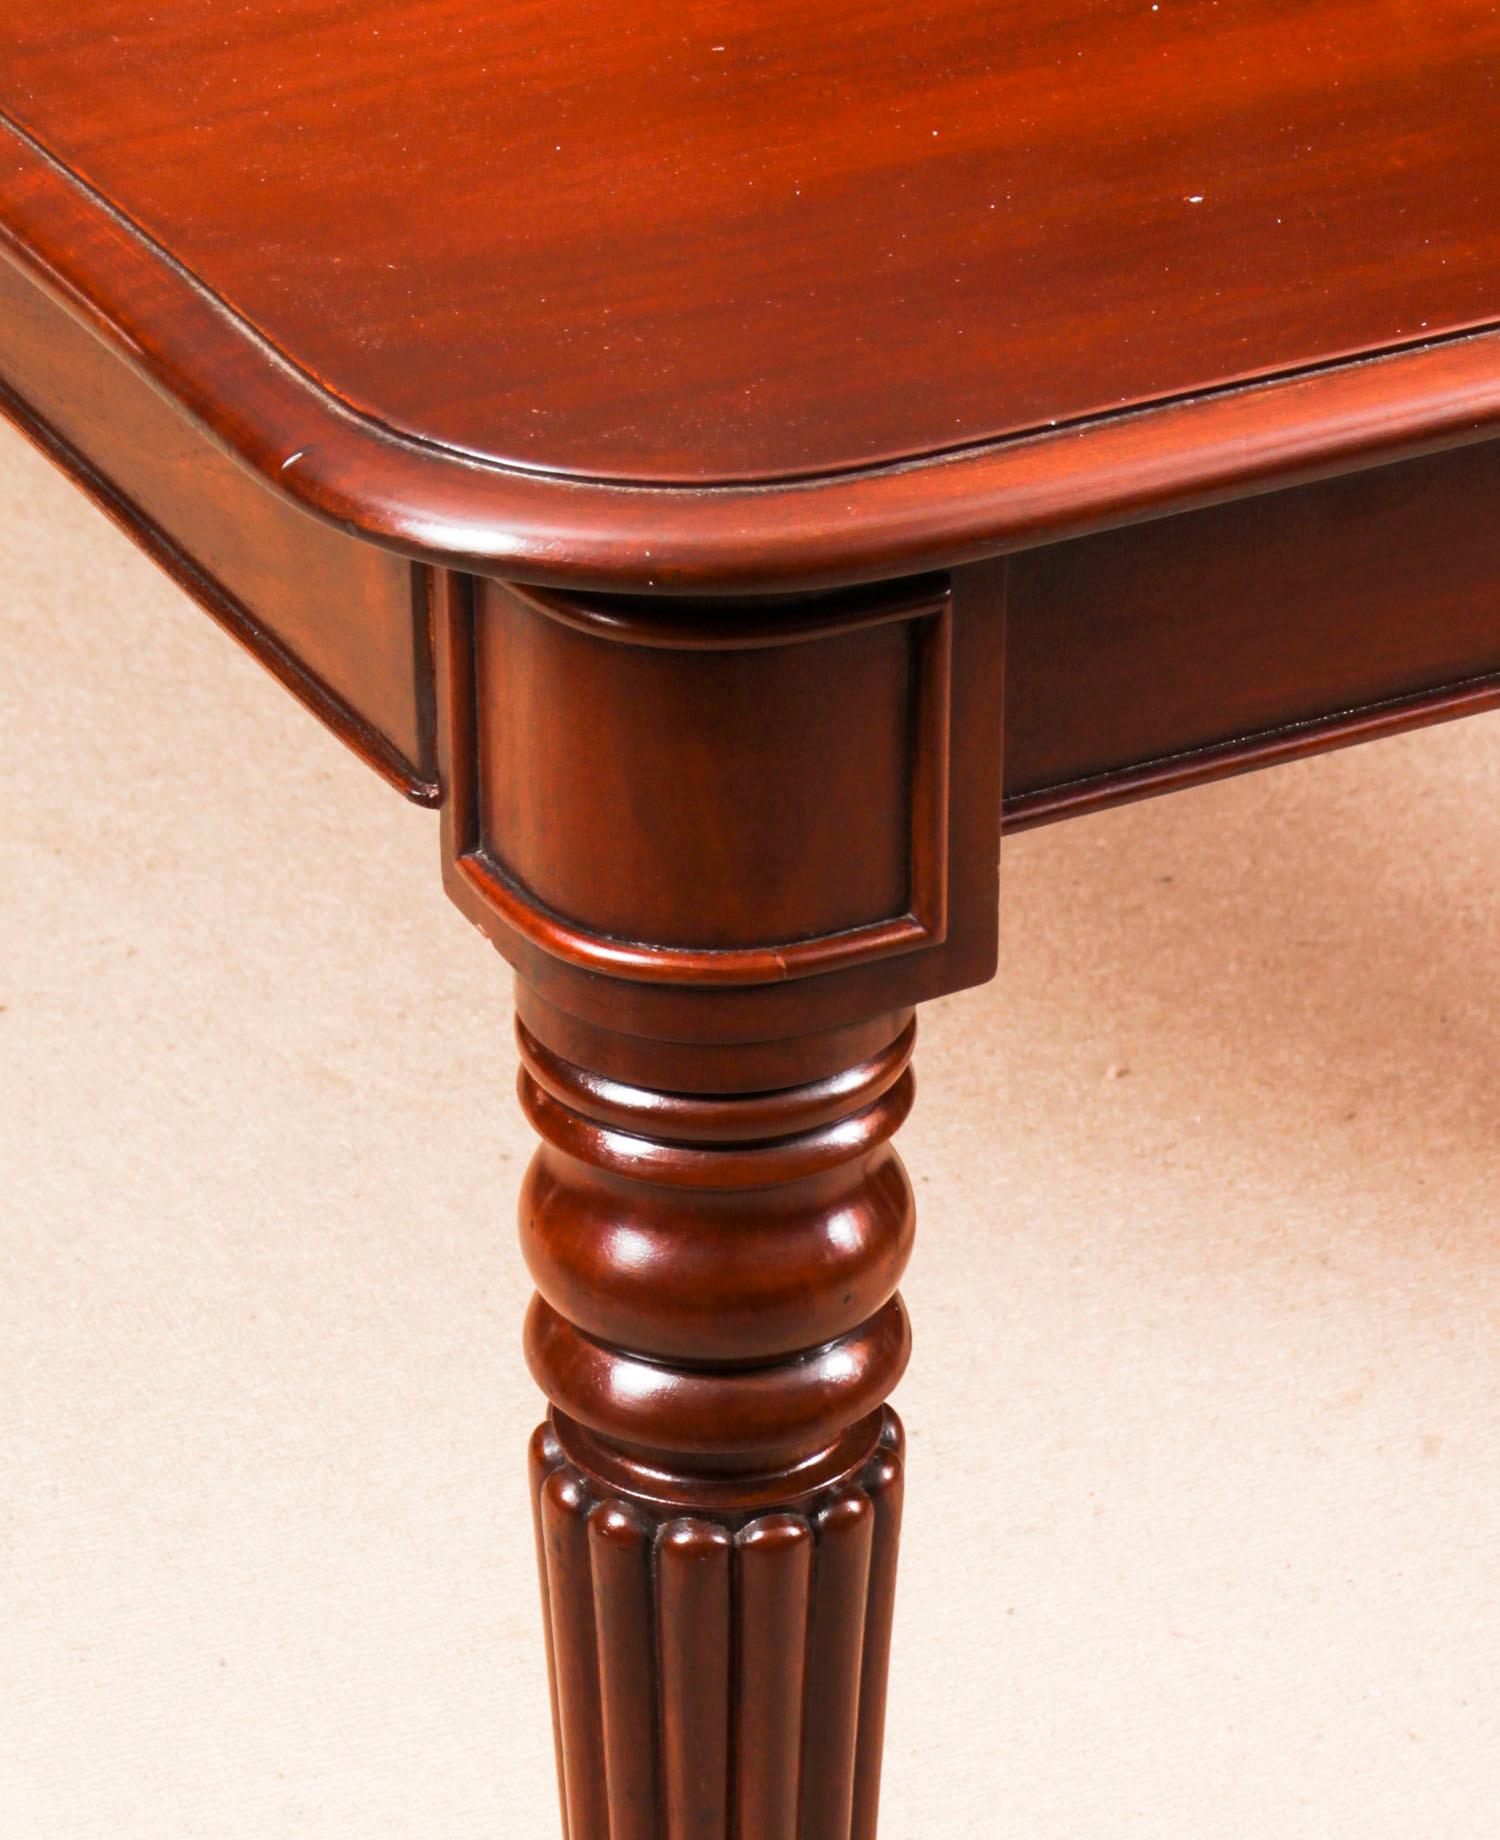 Antique Regency Flame Mahogany Extending Dining Table, 19th Century 14